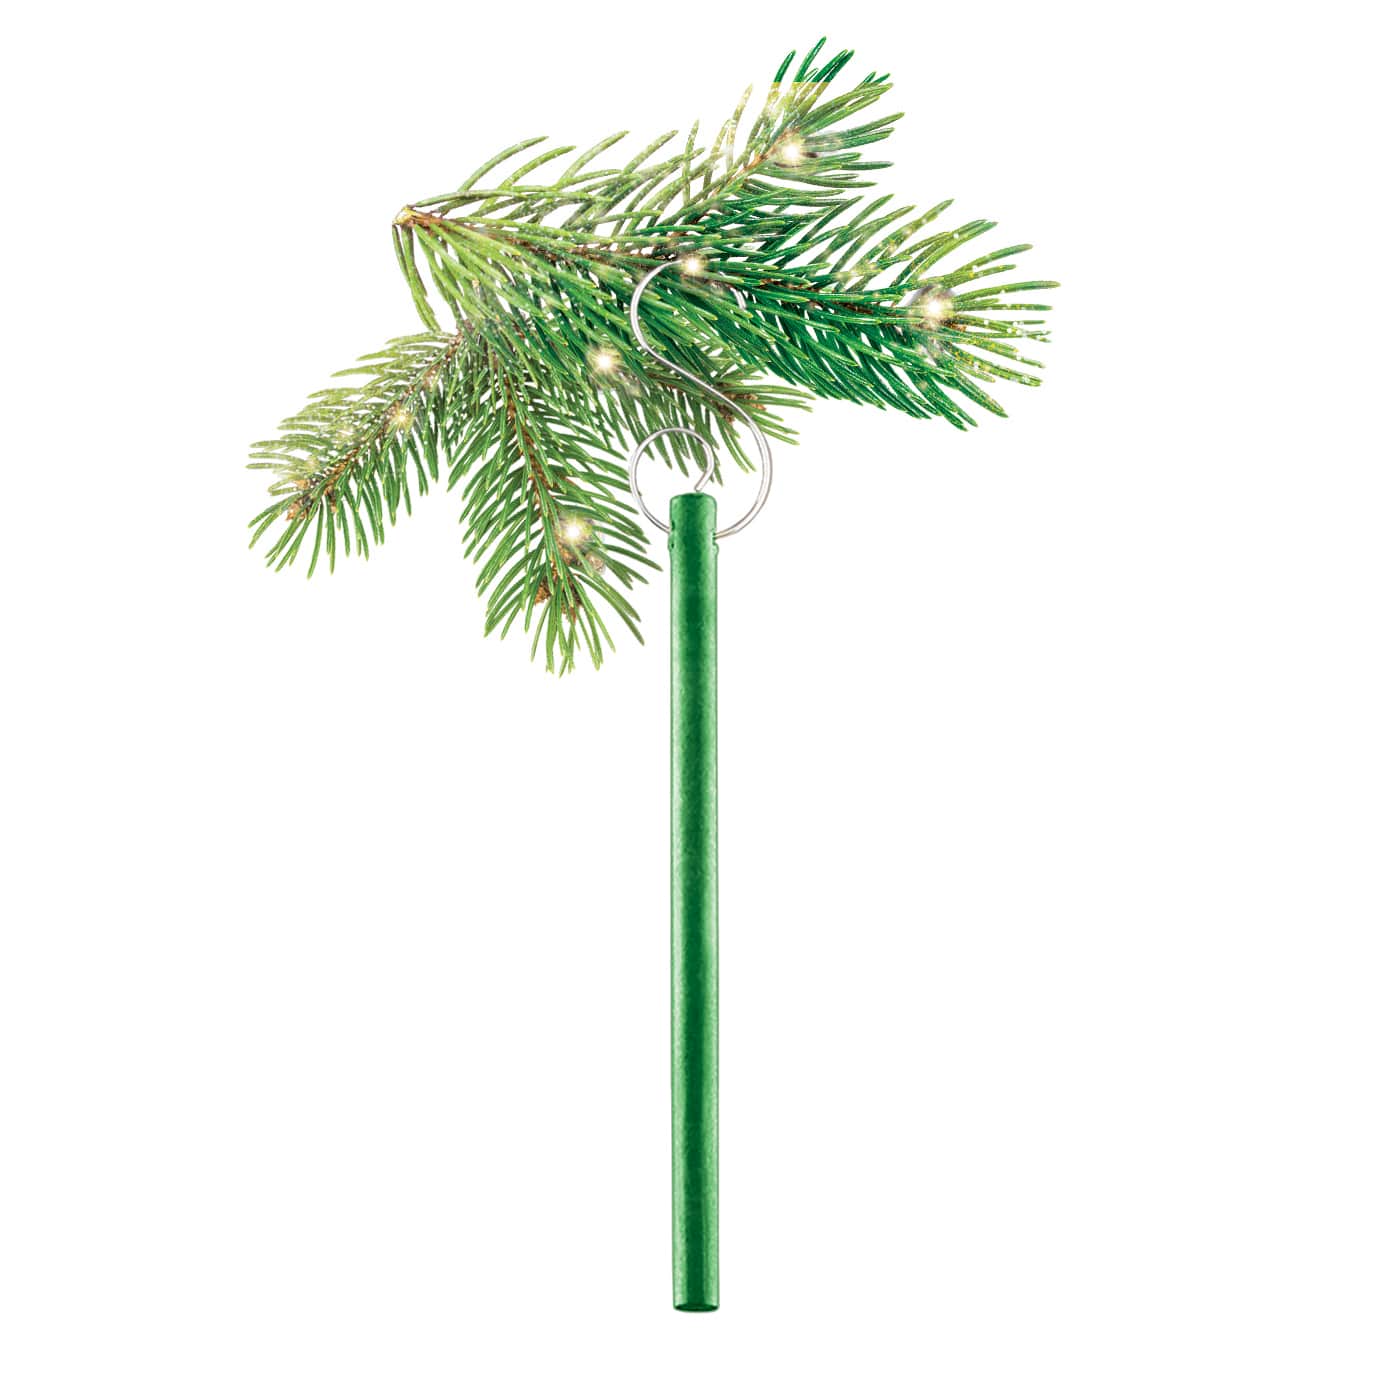 Scentsicles O Christmas Tree Scented Paper Stick Ornaments, 12ct.